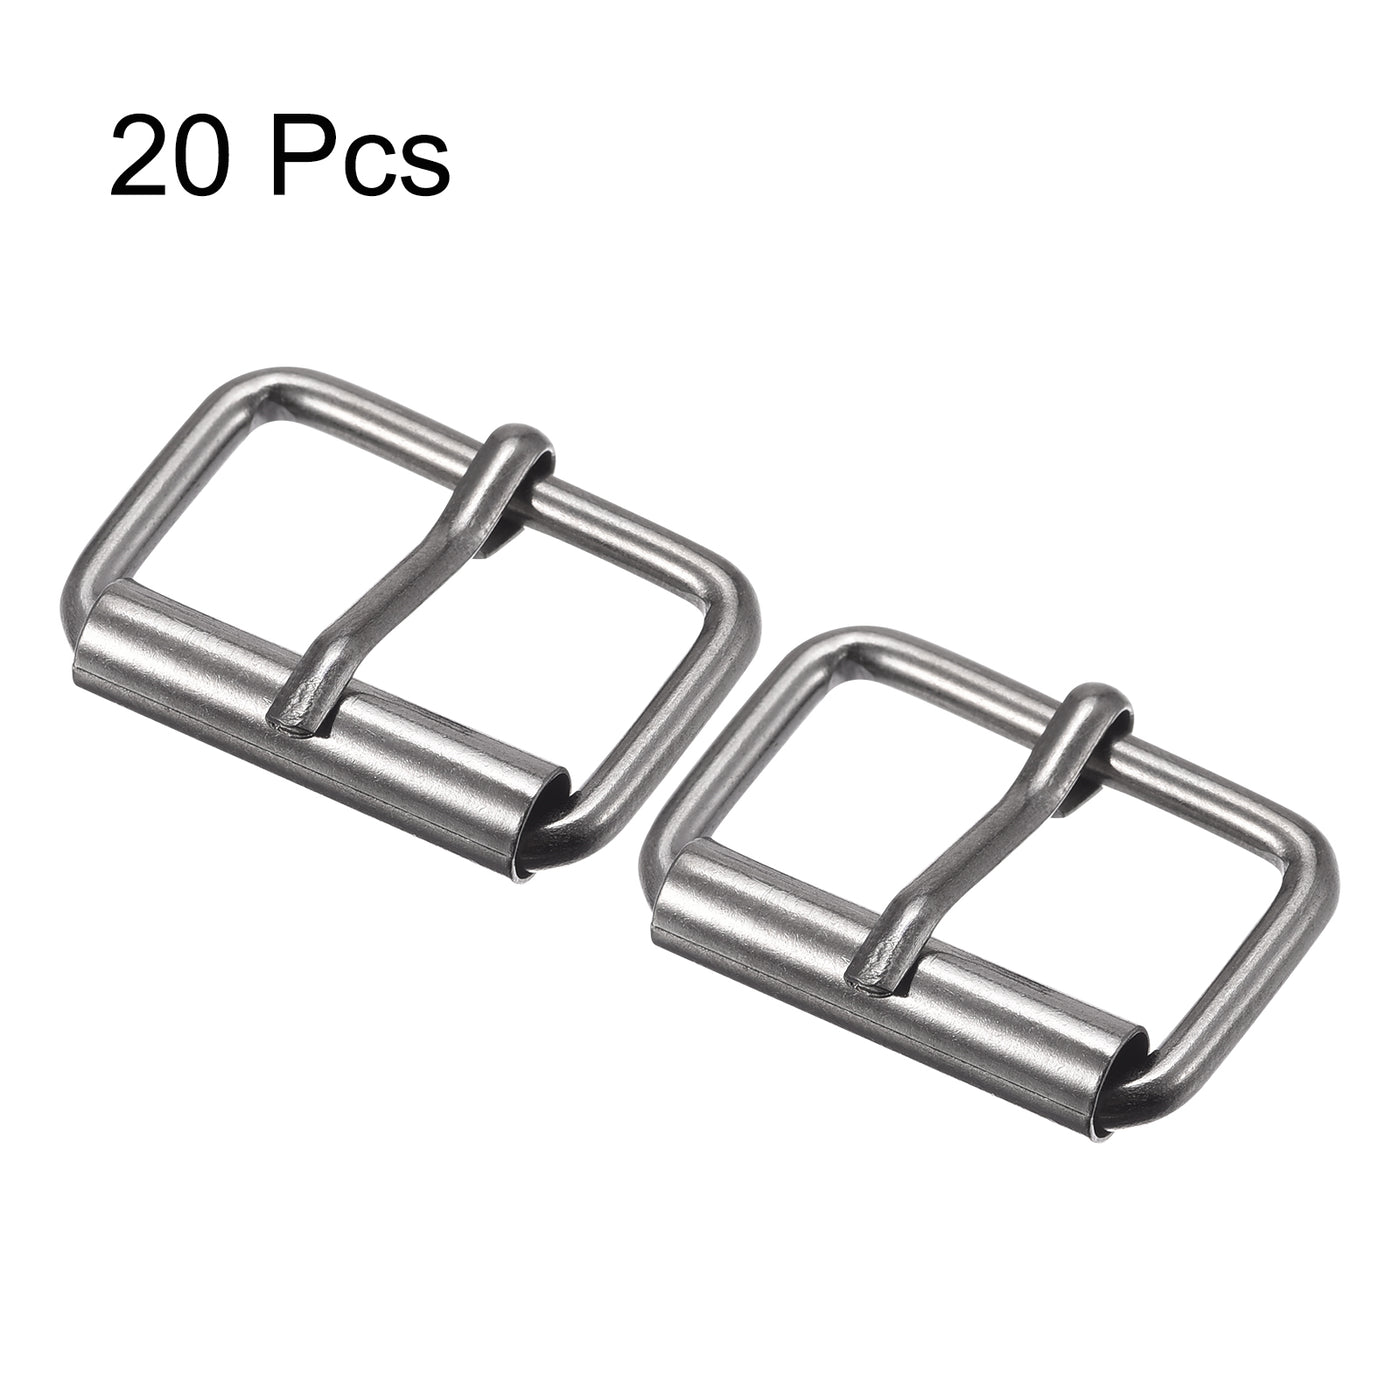 uxcell Uxcell 25mm(0.98") Metal Roller Buckles for Belts Bags Straps DIY Dark Gray 20pcs